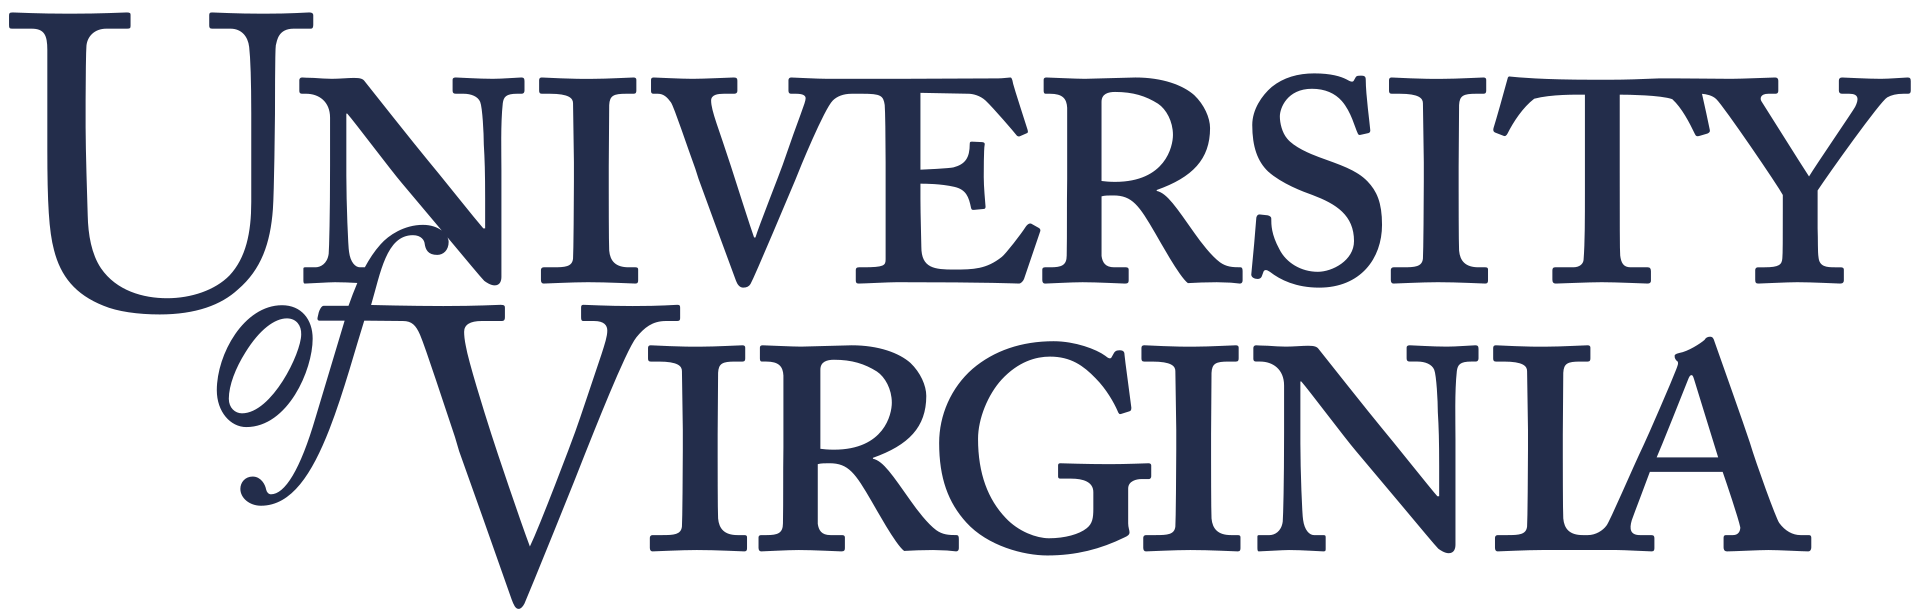 University of Virginia logo, By University of Virginia - Can be obtained from U.Va., Public Domain, https://commons.wikimedia.org/w/index.php?curid=18657033